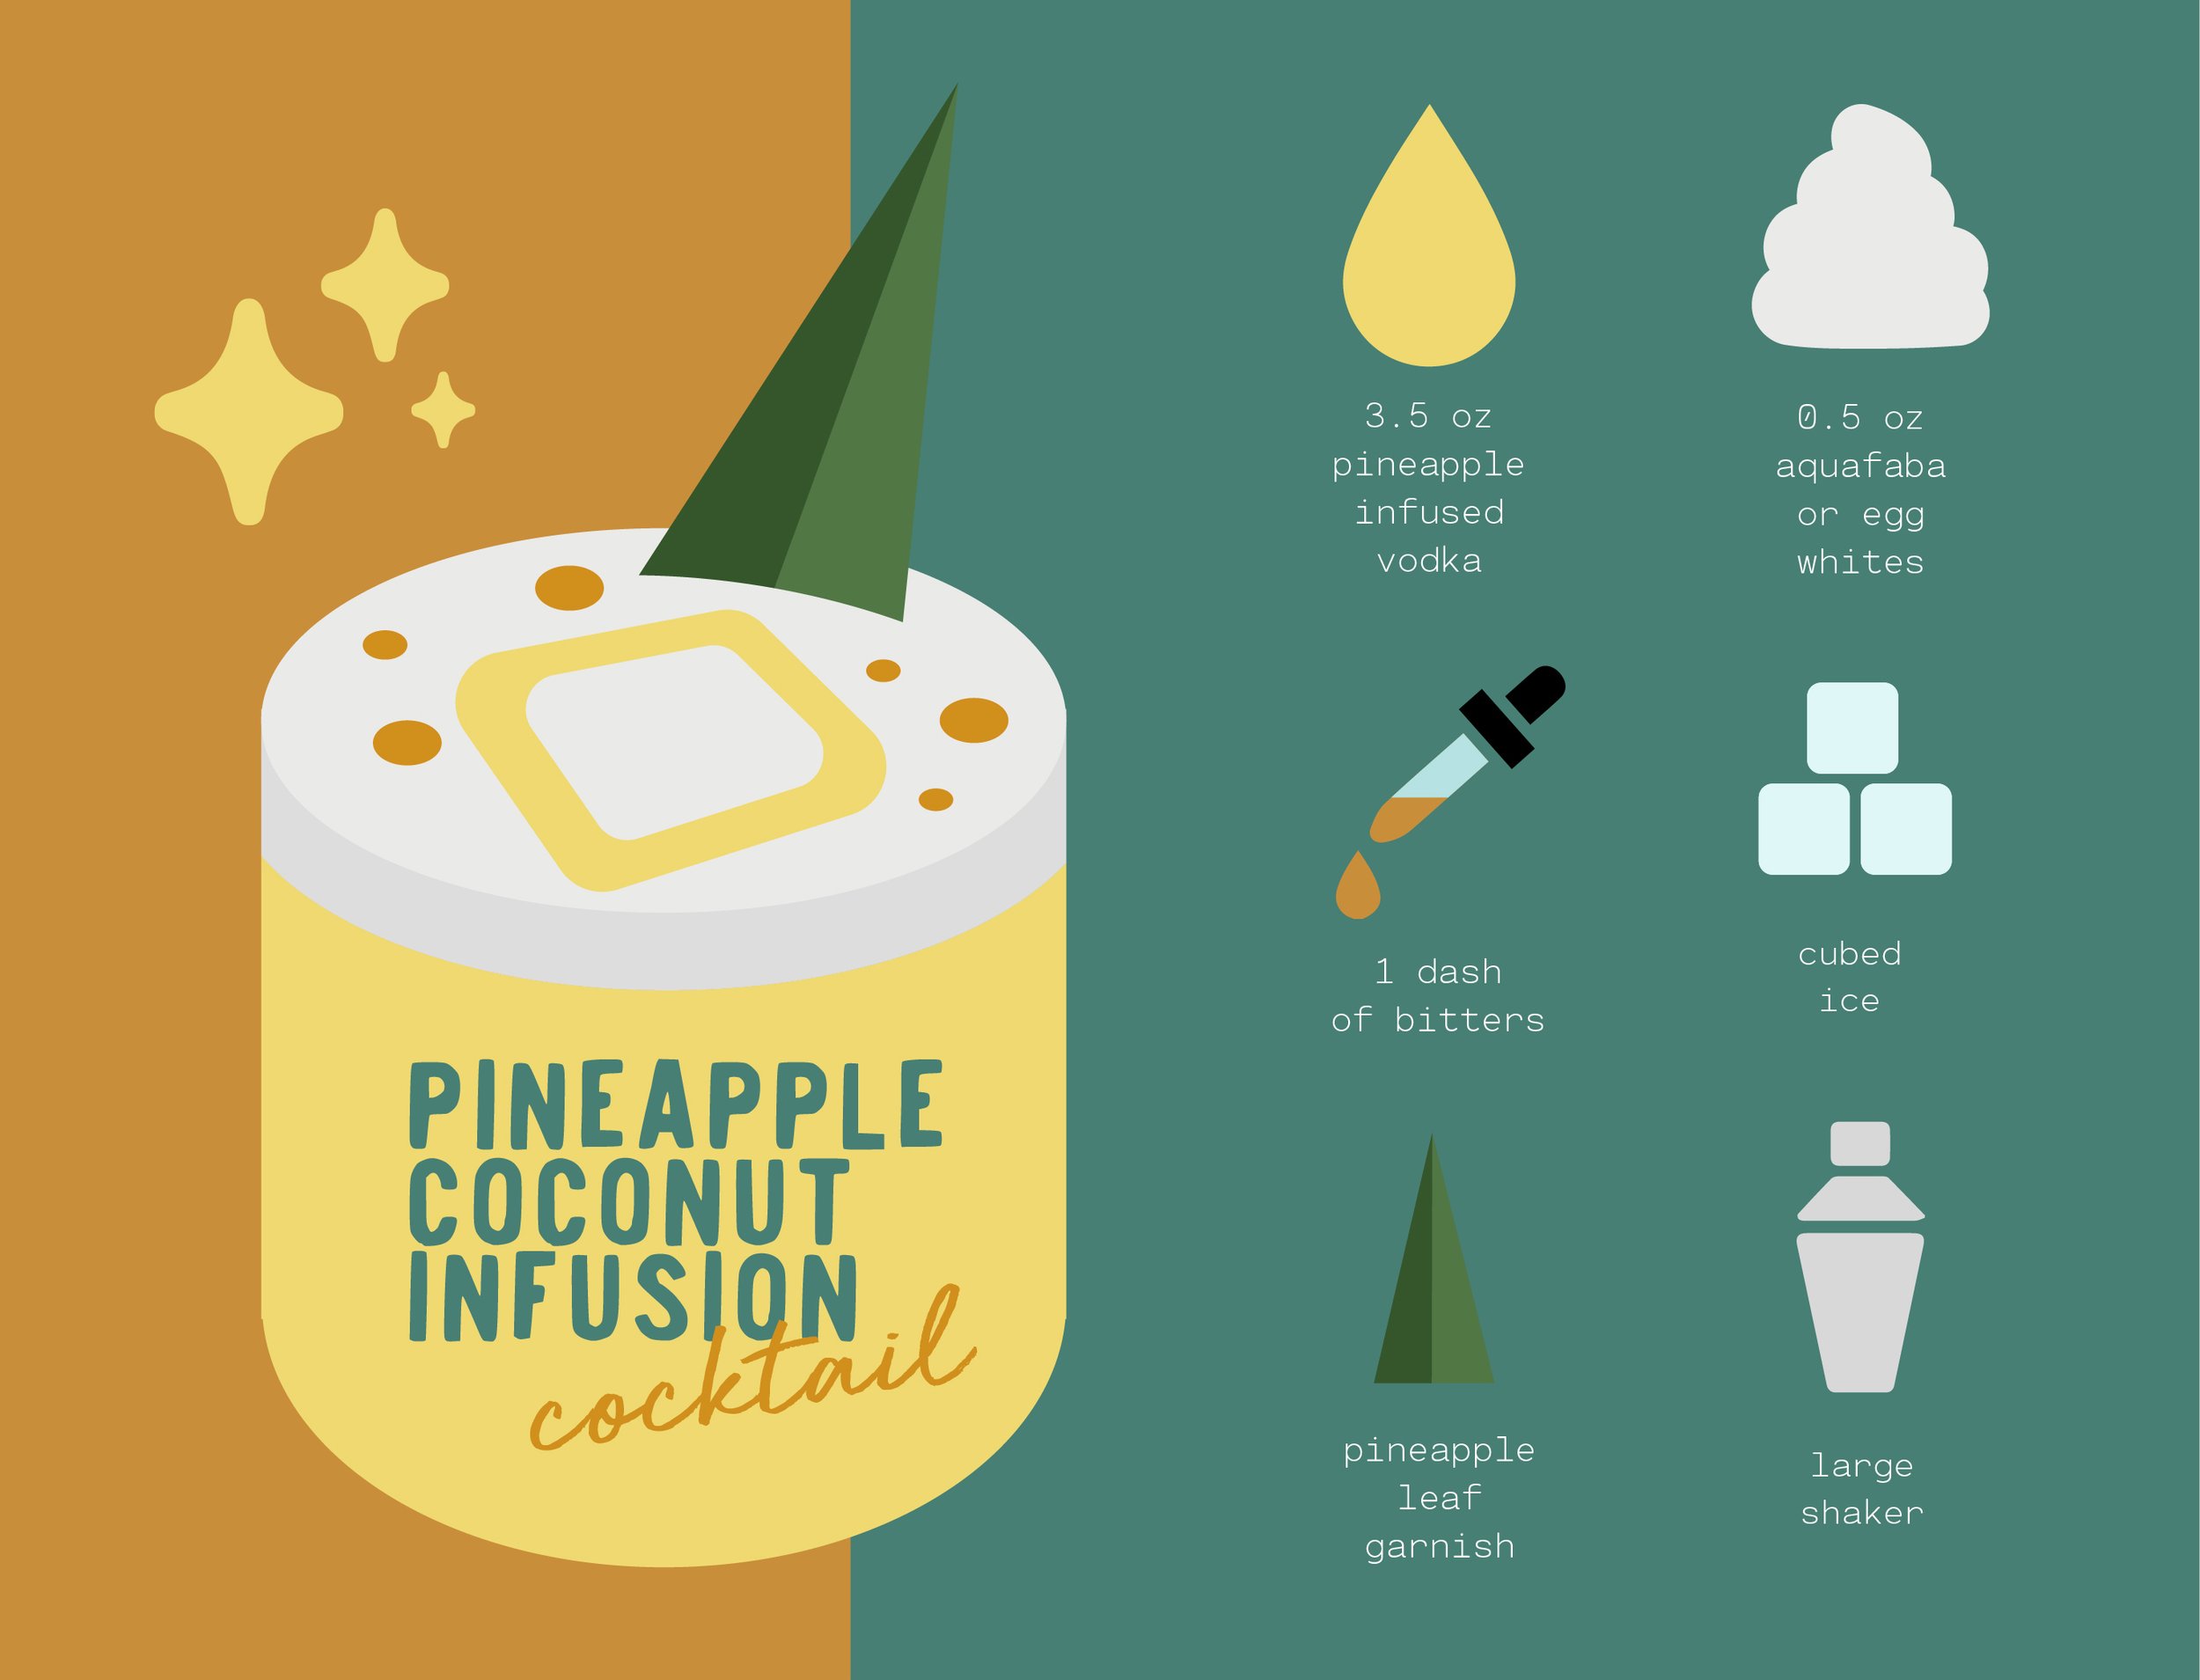 Pineapple Coconut Infusion RecipeCards-02.jpg